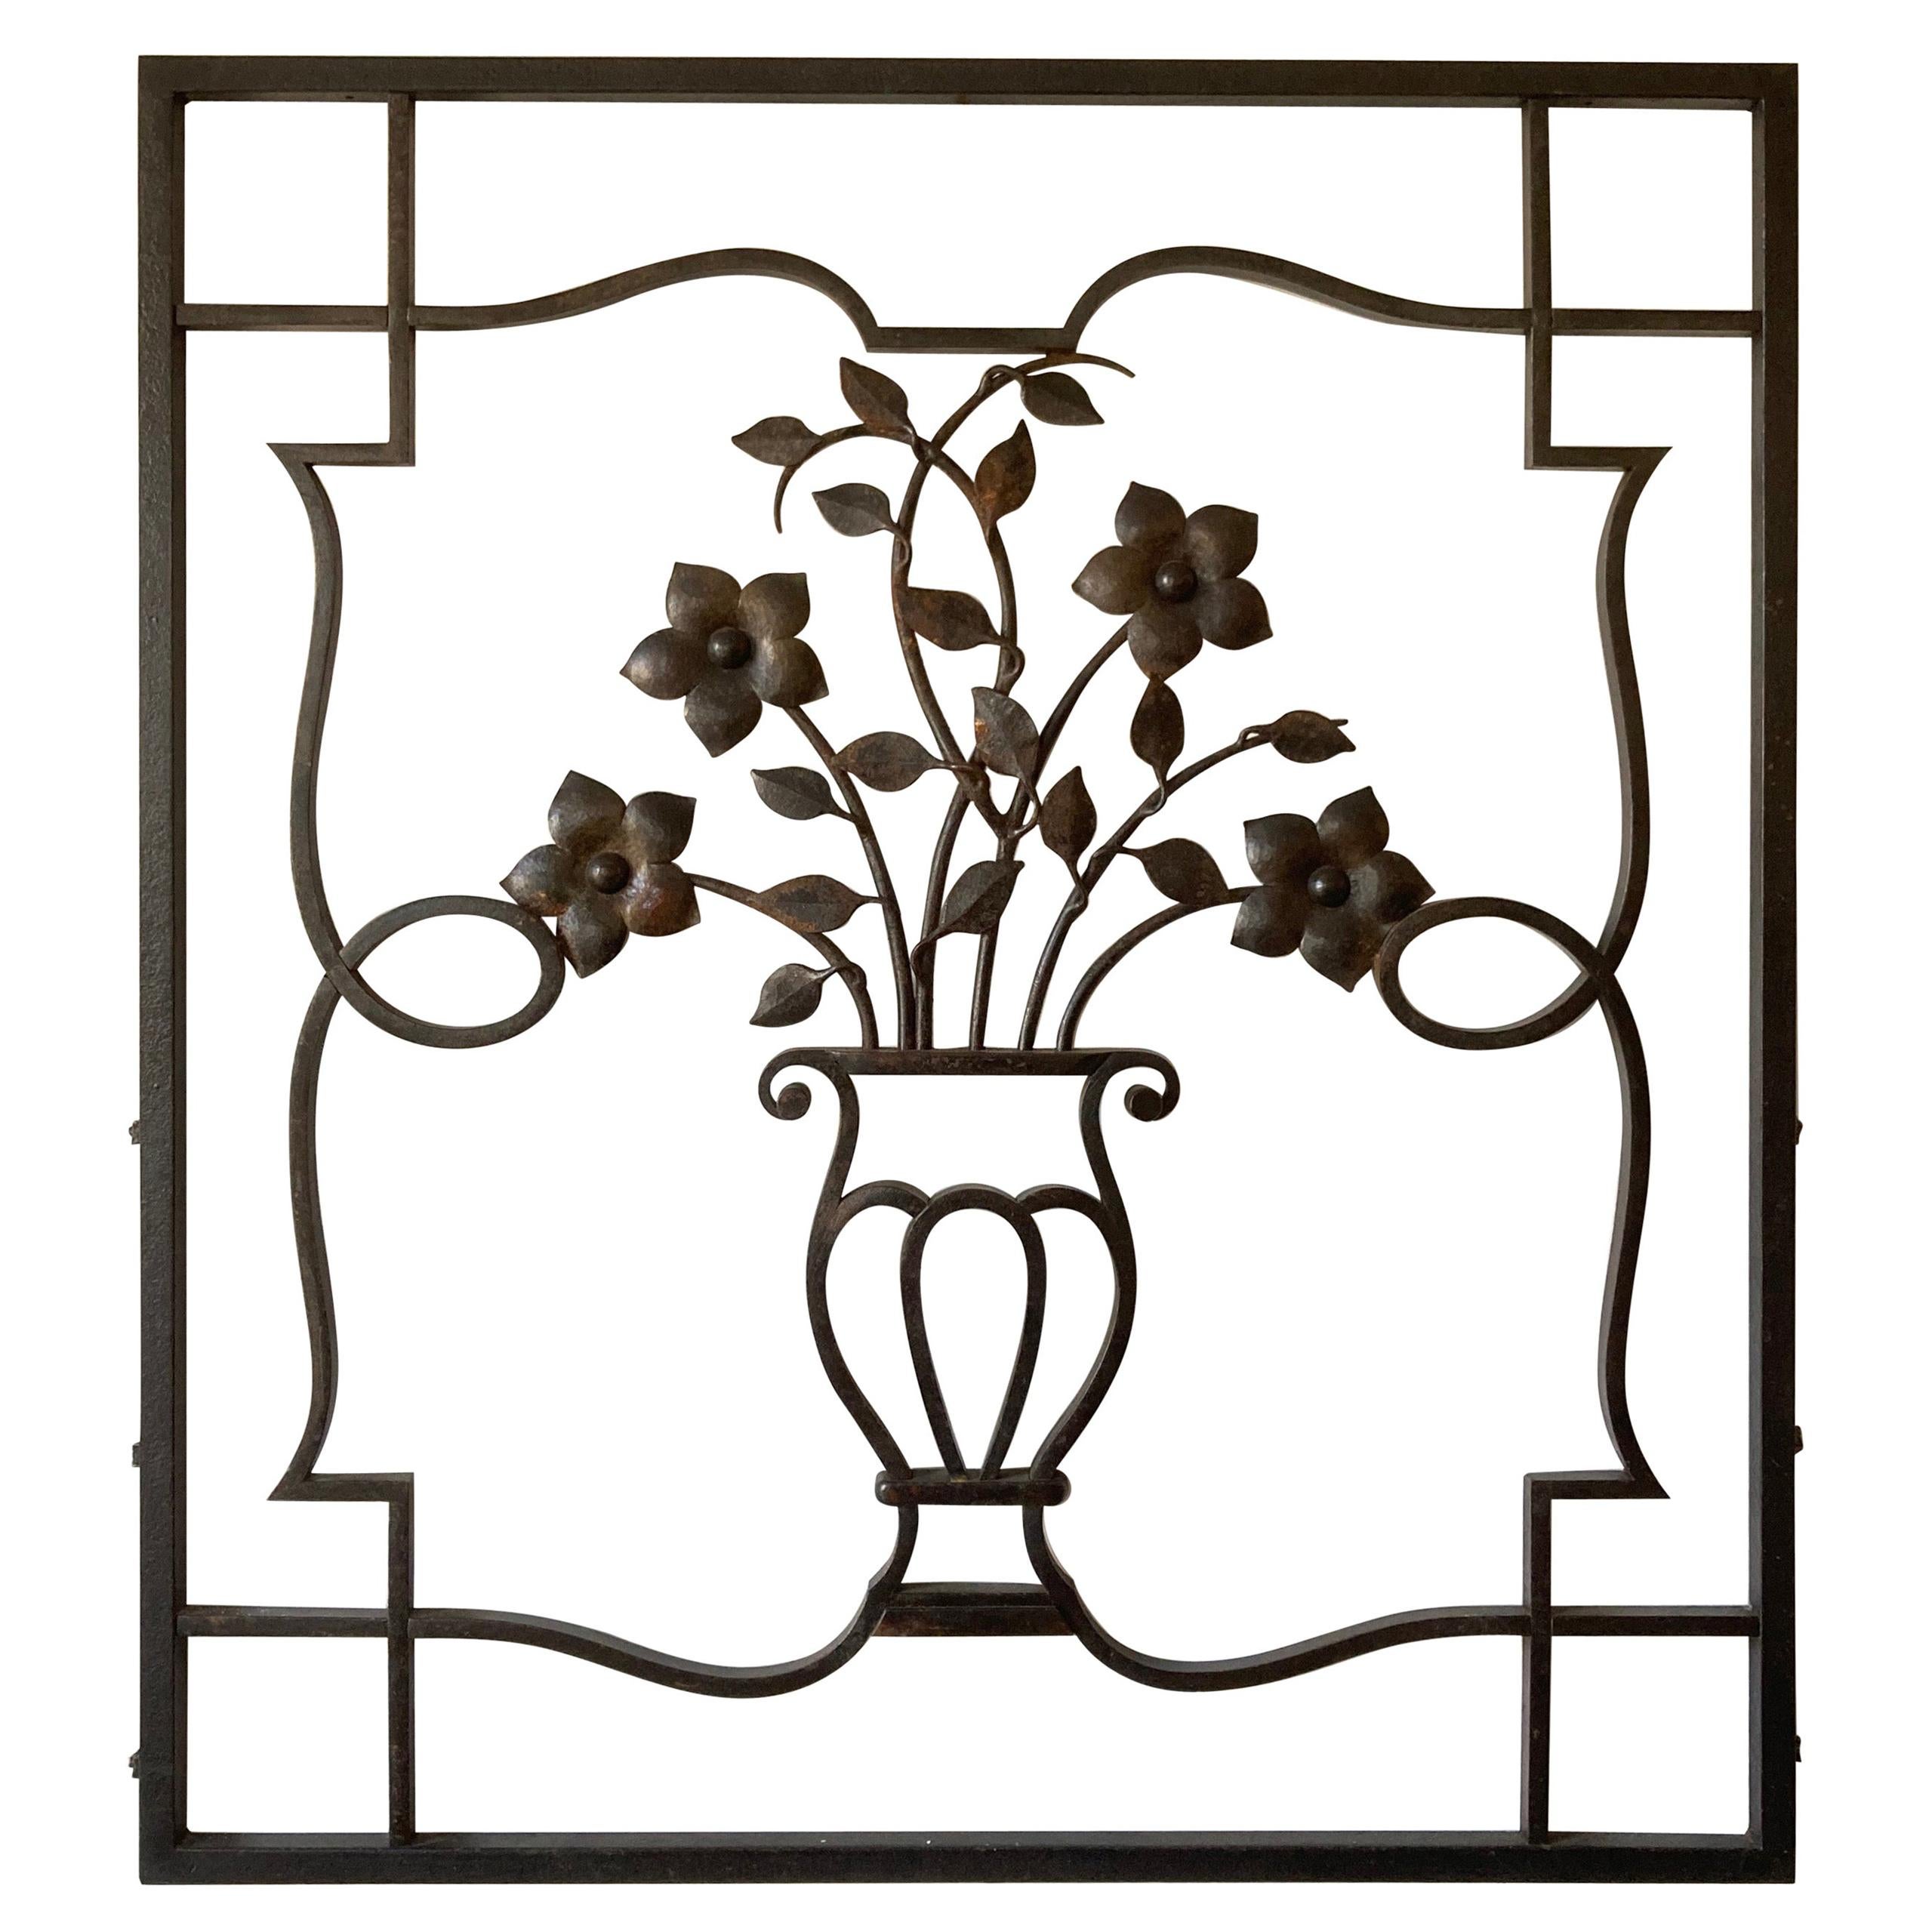 French Decorative Iron Wall Sculpture or Applique, Urn and Floral Motif For Sale